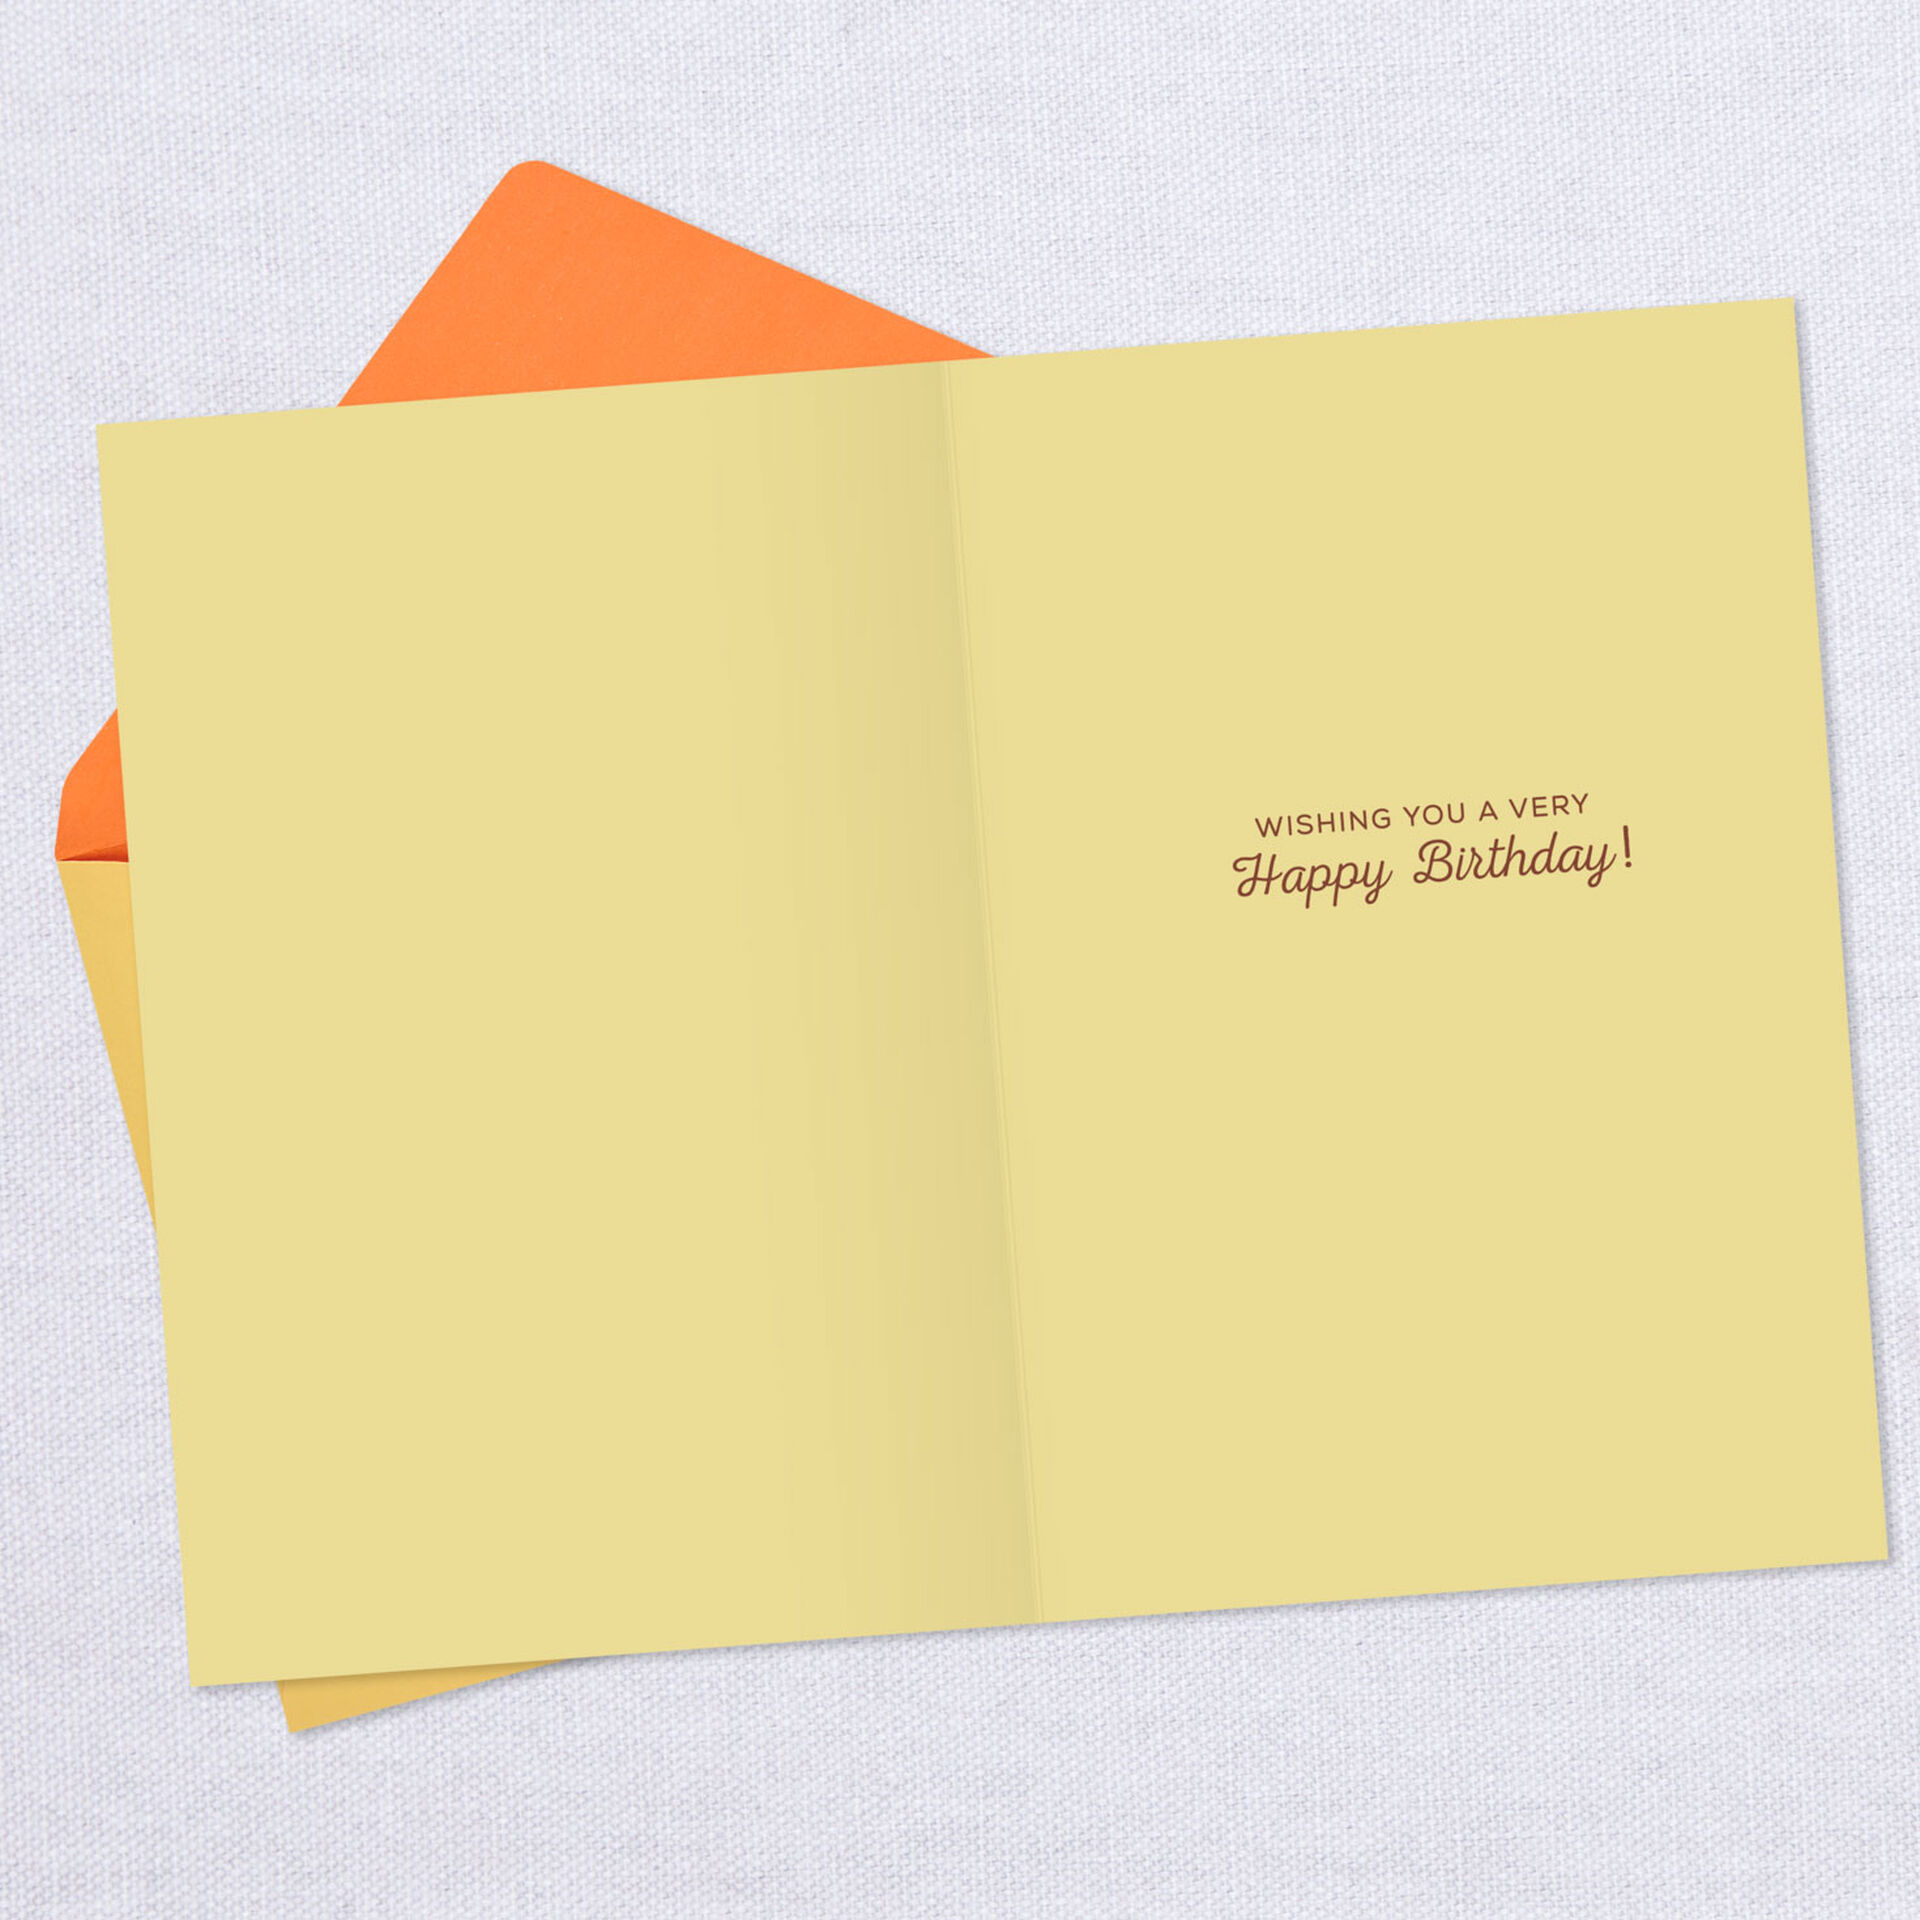 Mountains-and-Field-of-Flowers-Birthday-Card_299HBD3667_03